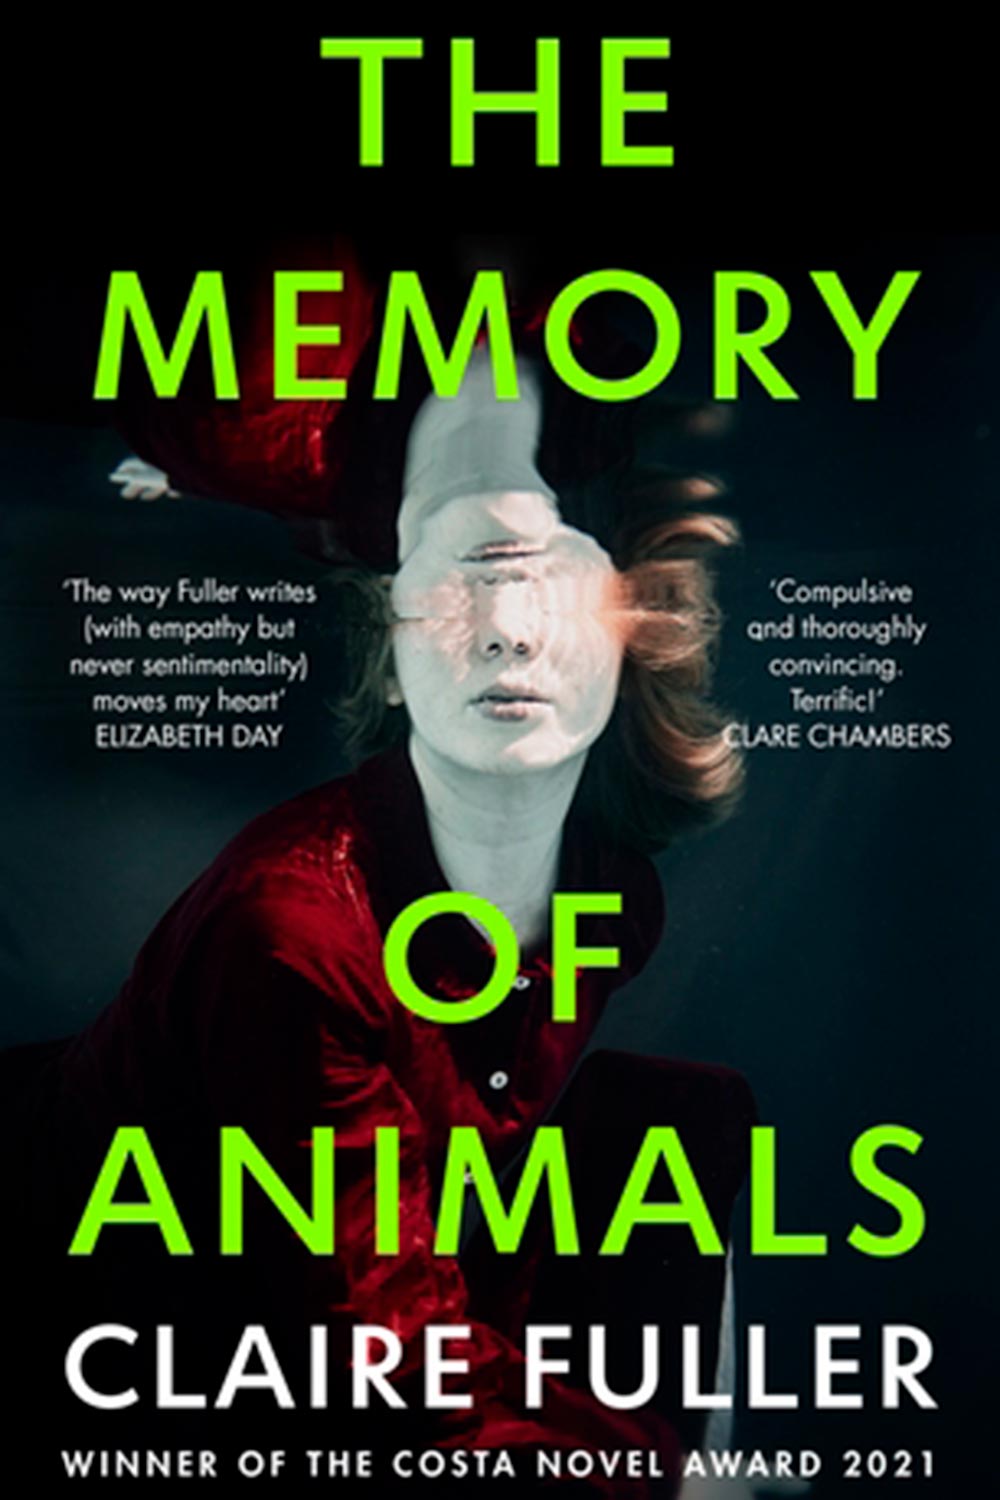 An image of the cover of The memory of animals by Claire Fuller